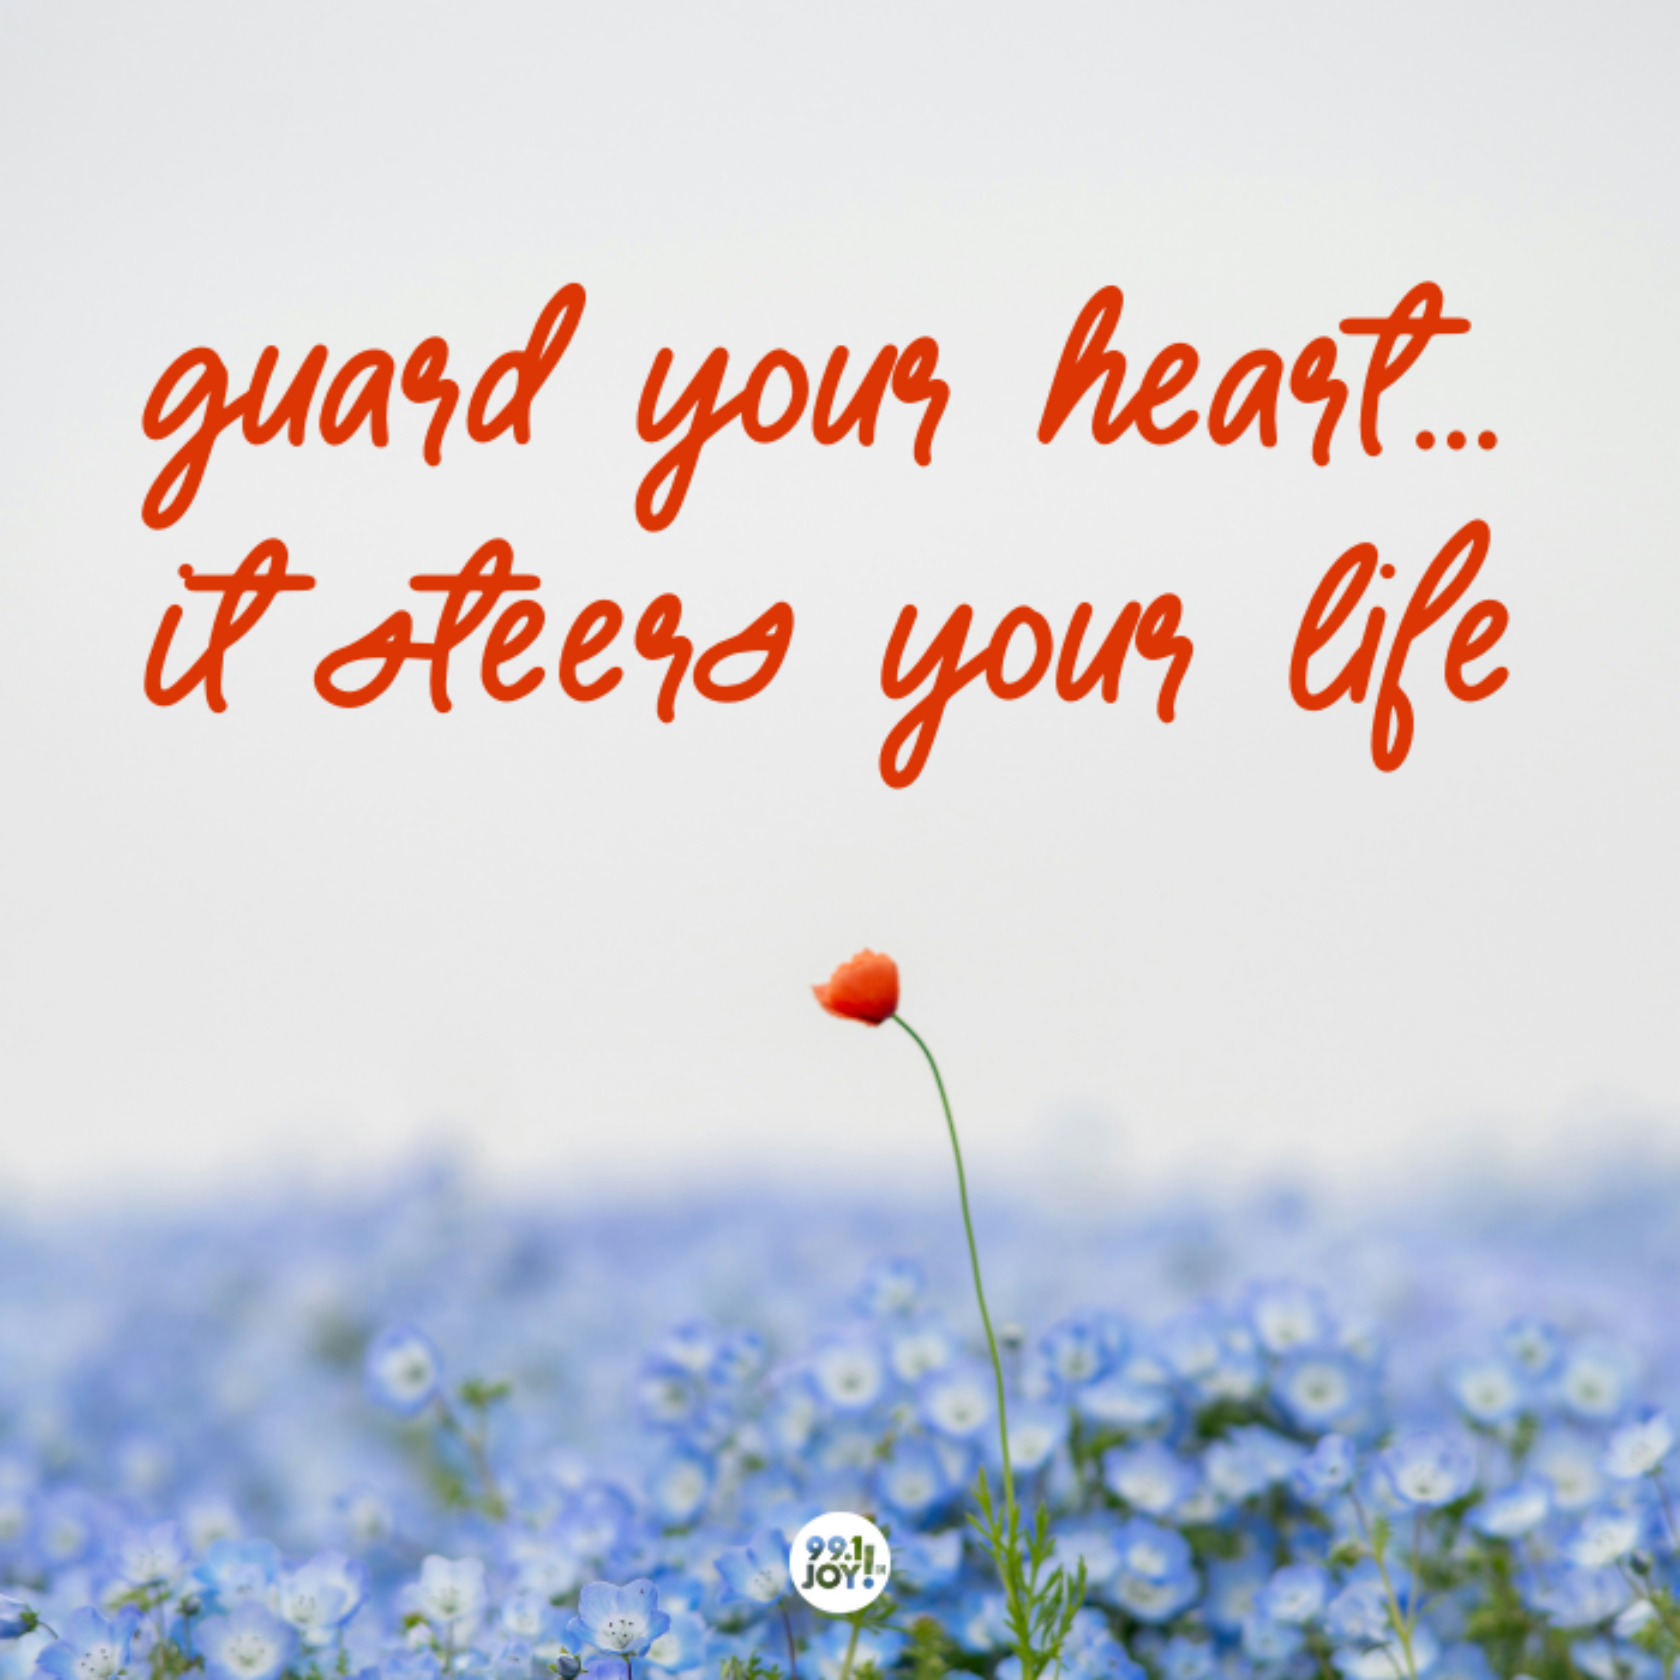 Guard Your Heart…It Steers Your Life